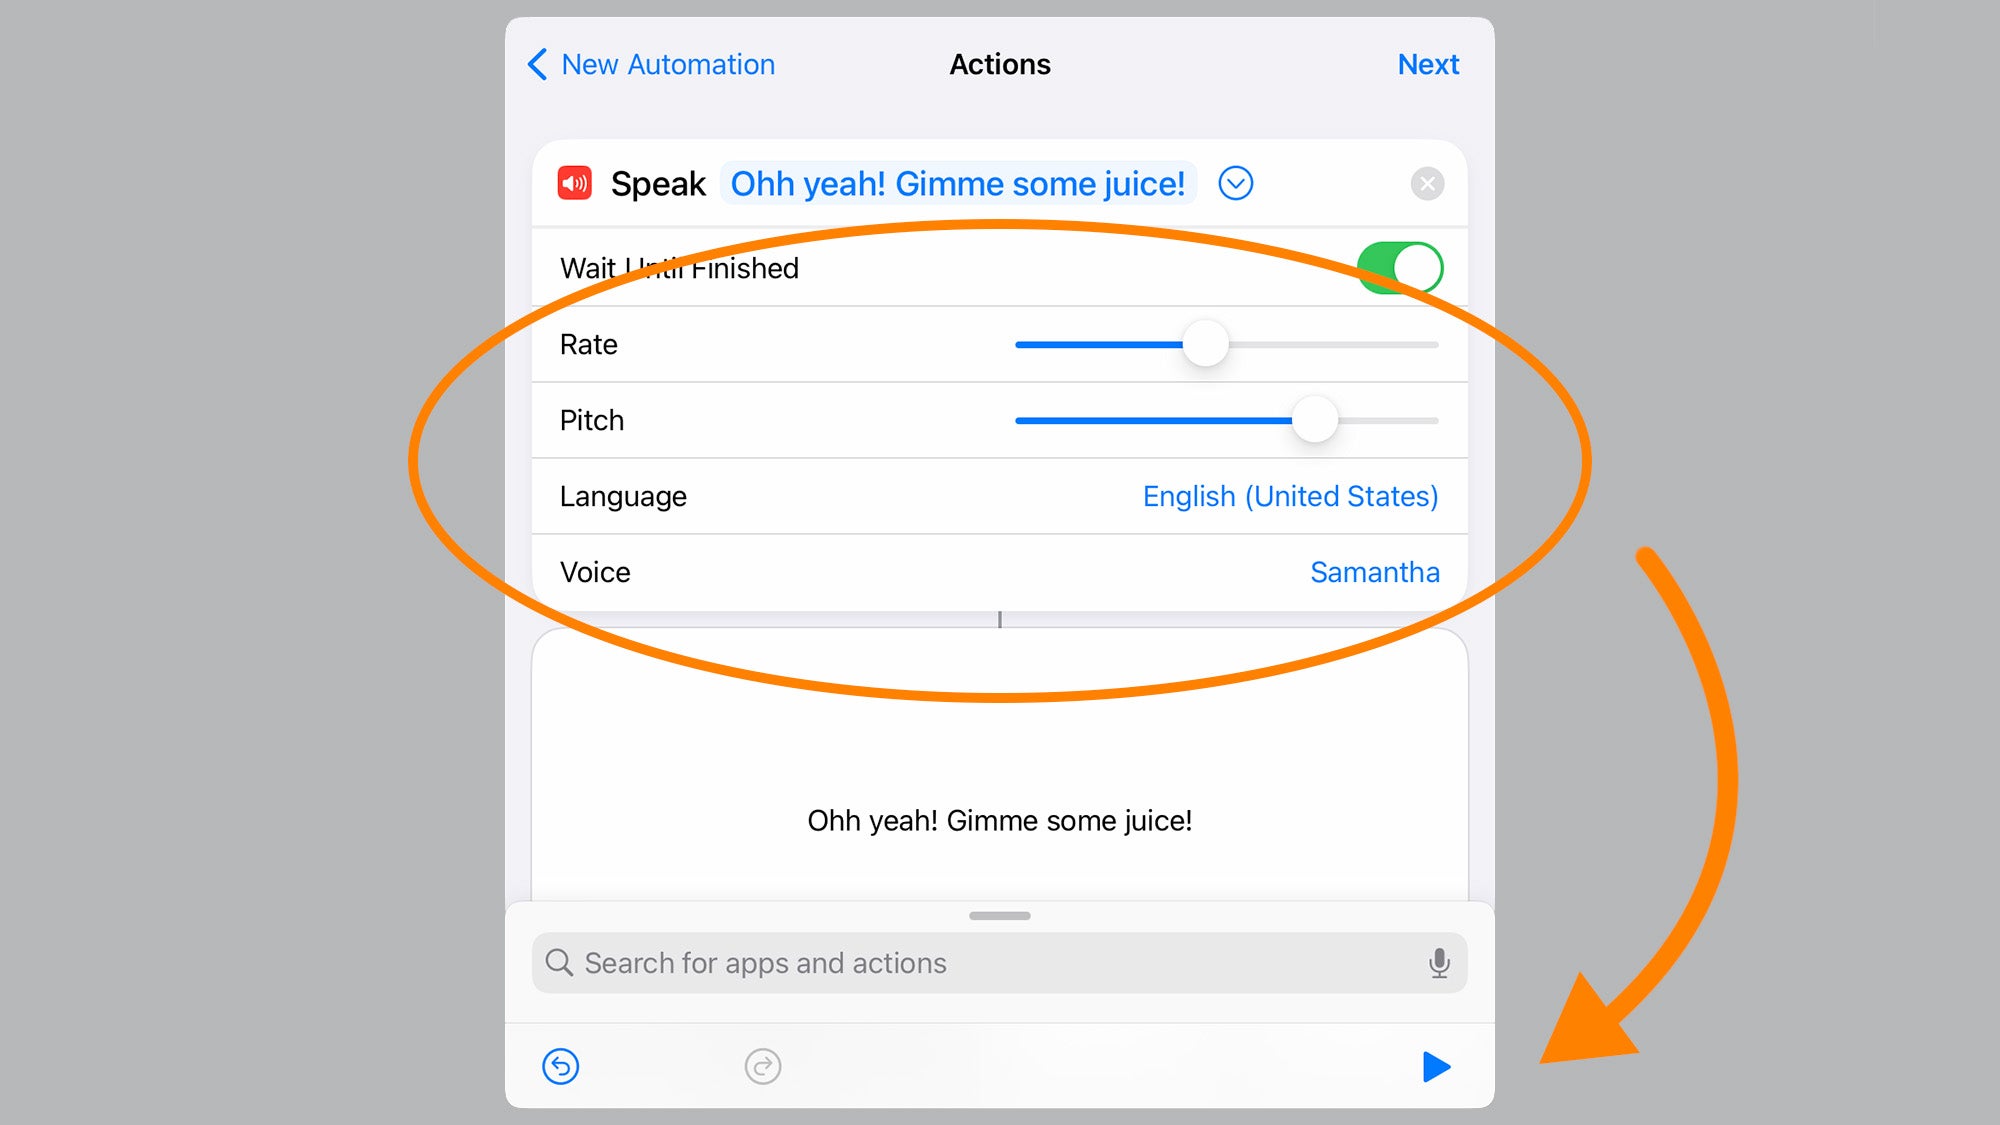 More action customization menu for iPhone automation